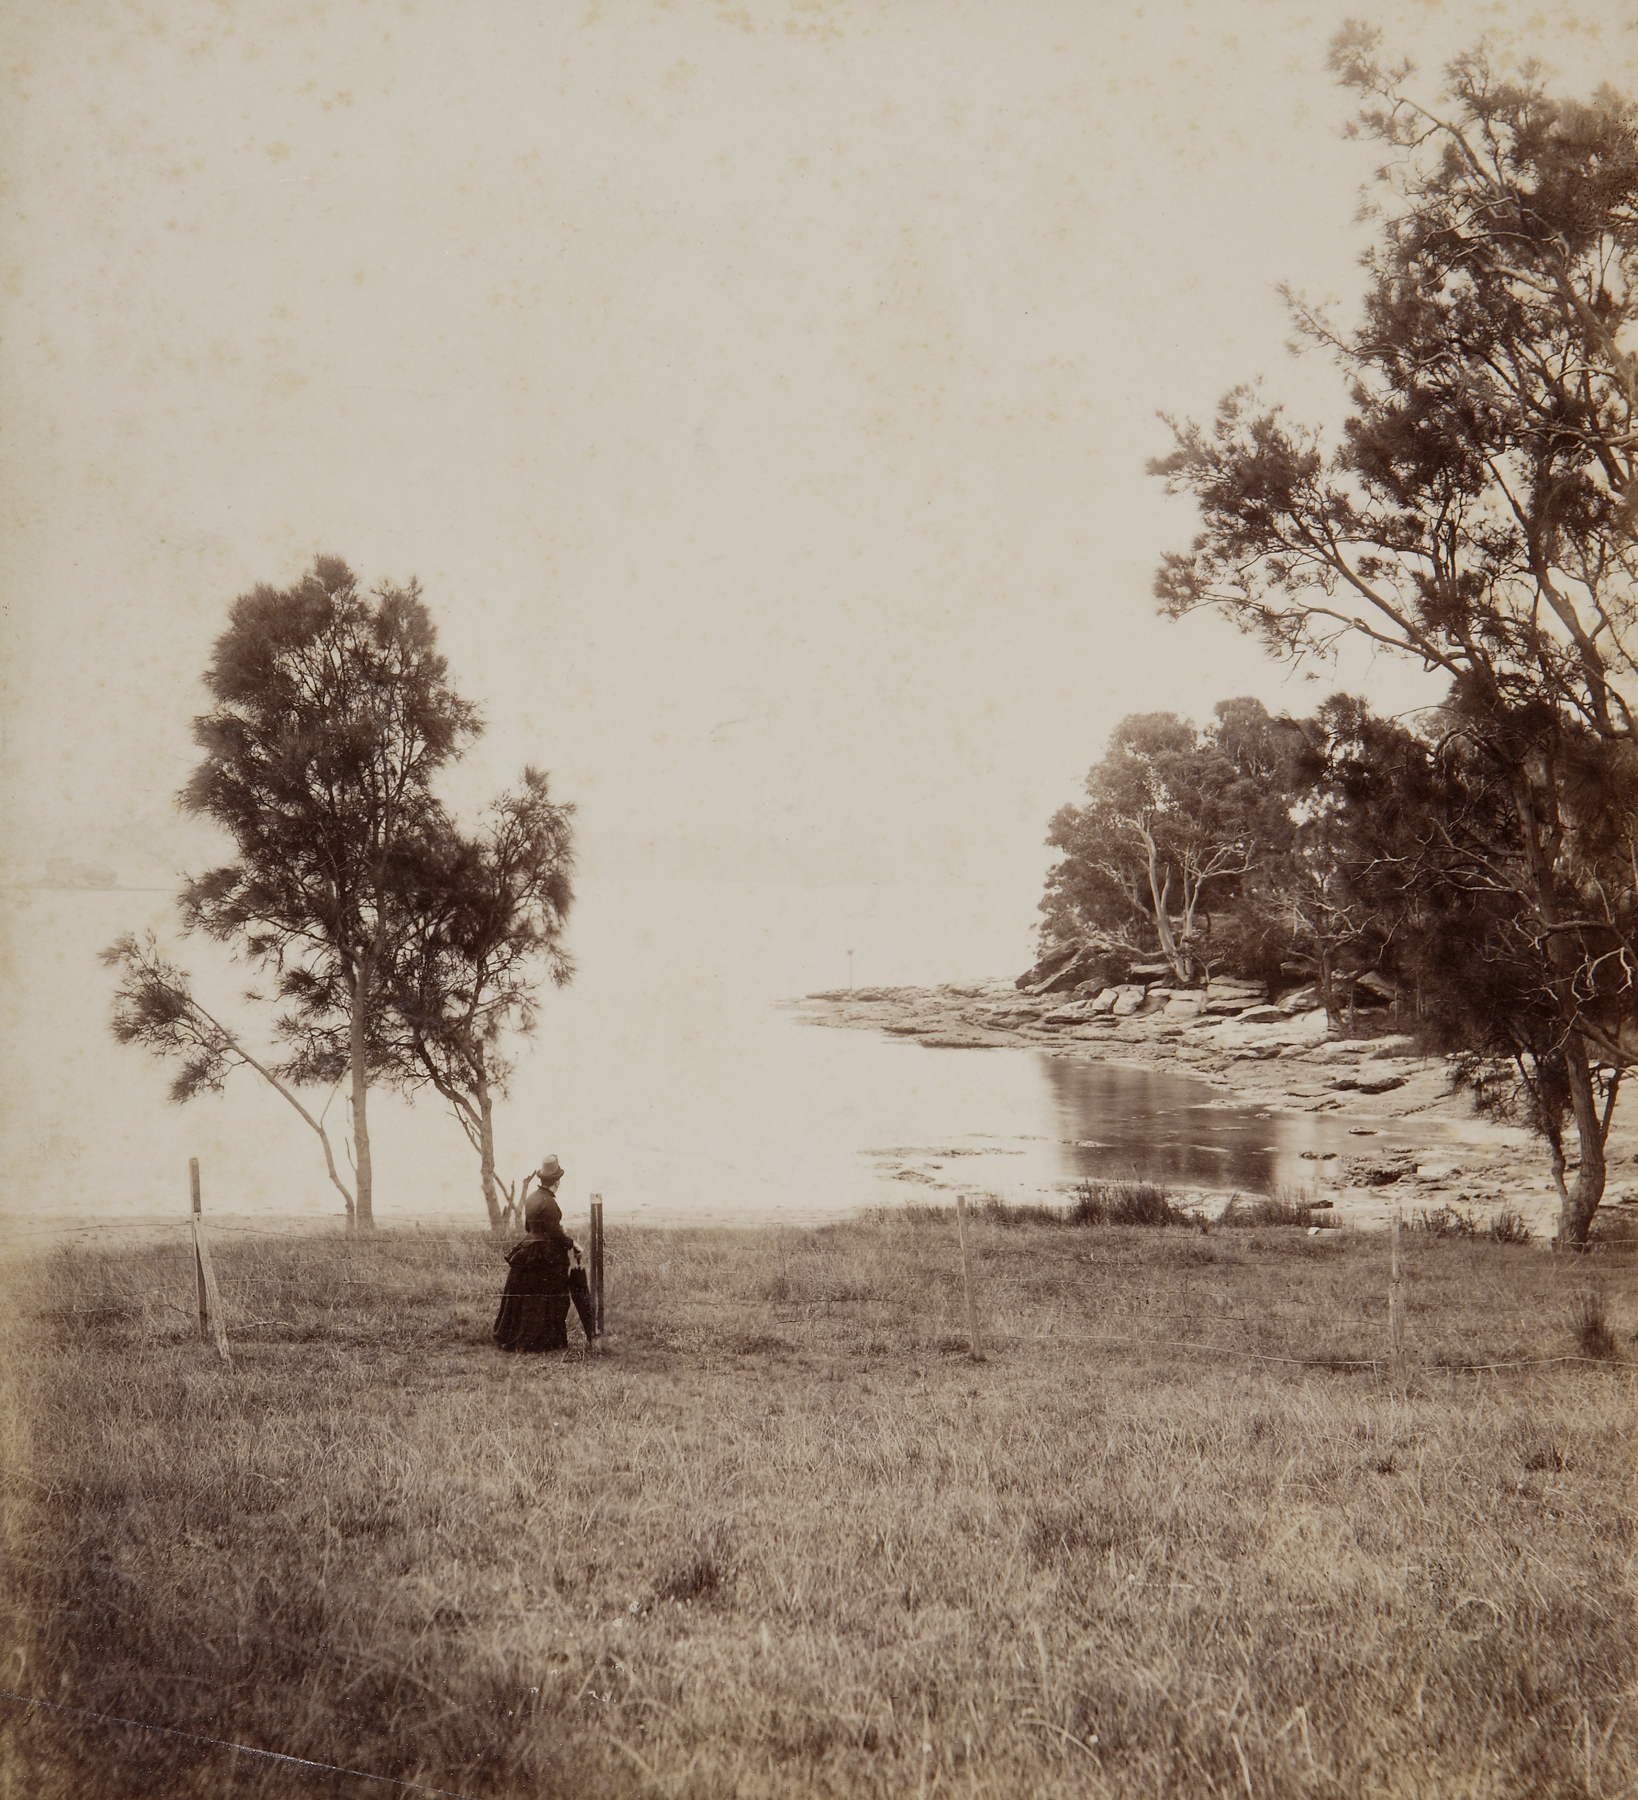 Vaucluse Bay, ca. 1880 / photographer unknown